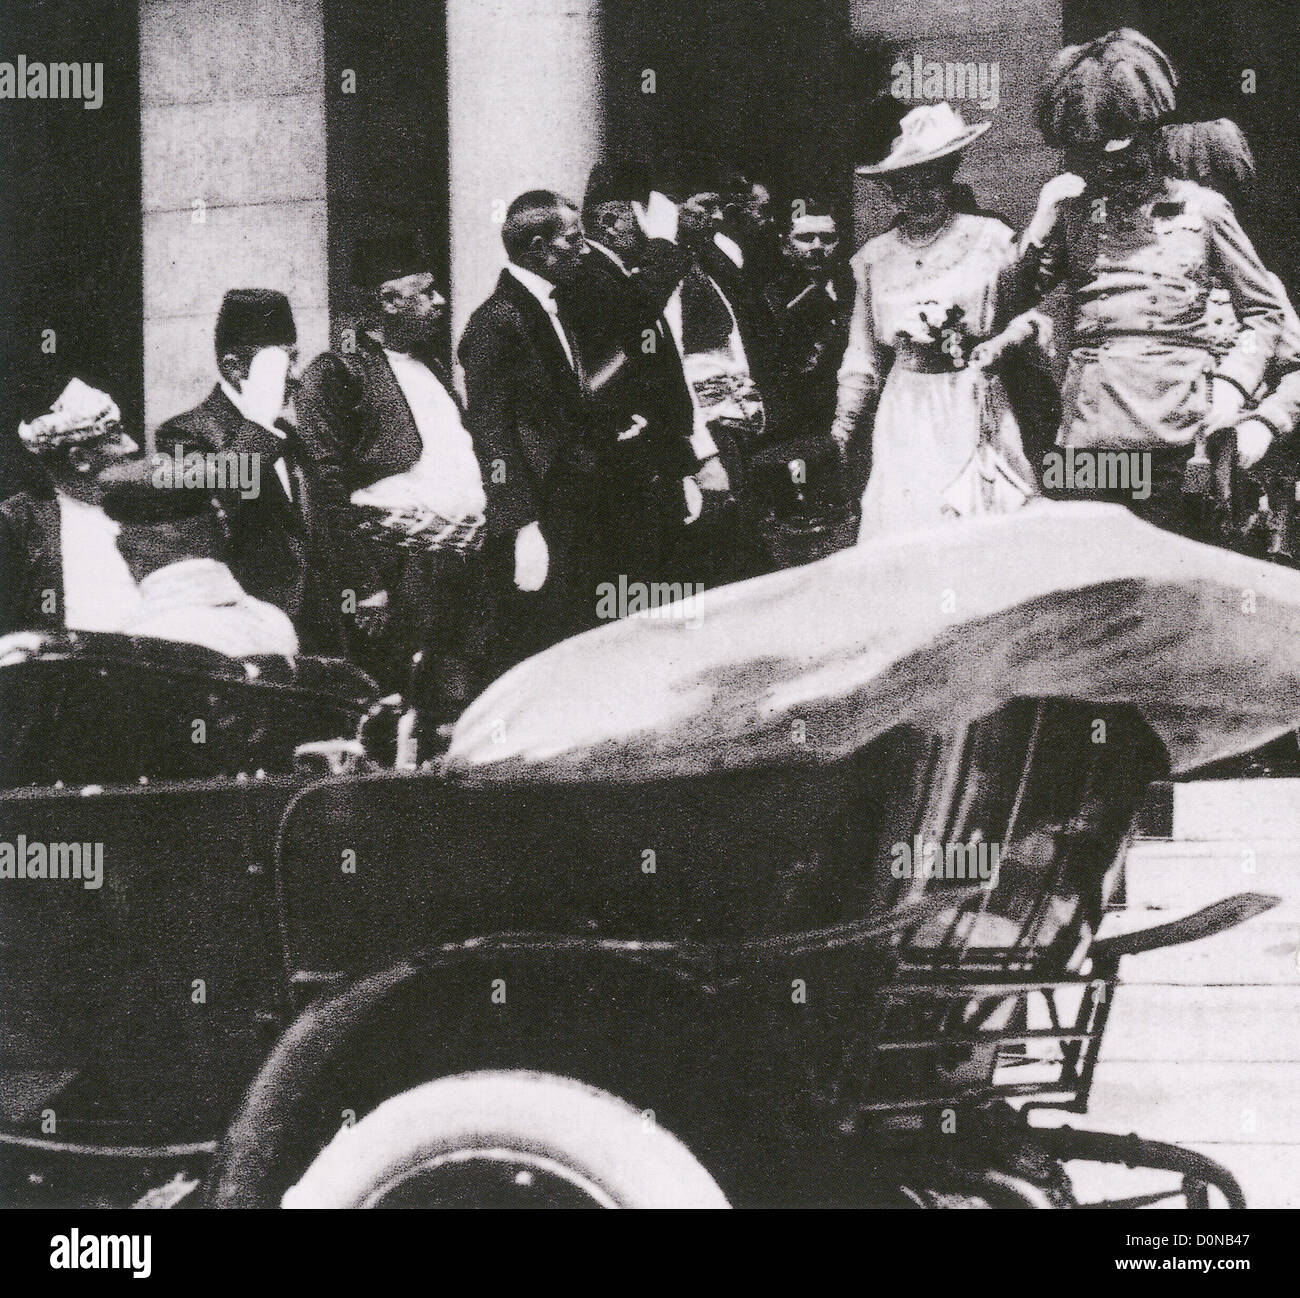 ARCHDUKE FRANZ FERDINAND and his wife Duchess Sophie leave Sarajevo town halls before their assassination on 28 June 1914 Stock Photo